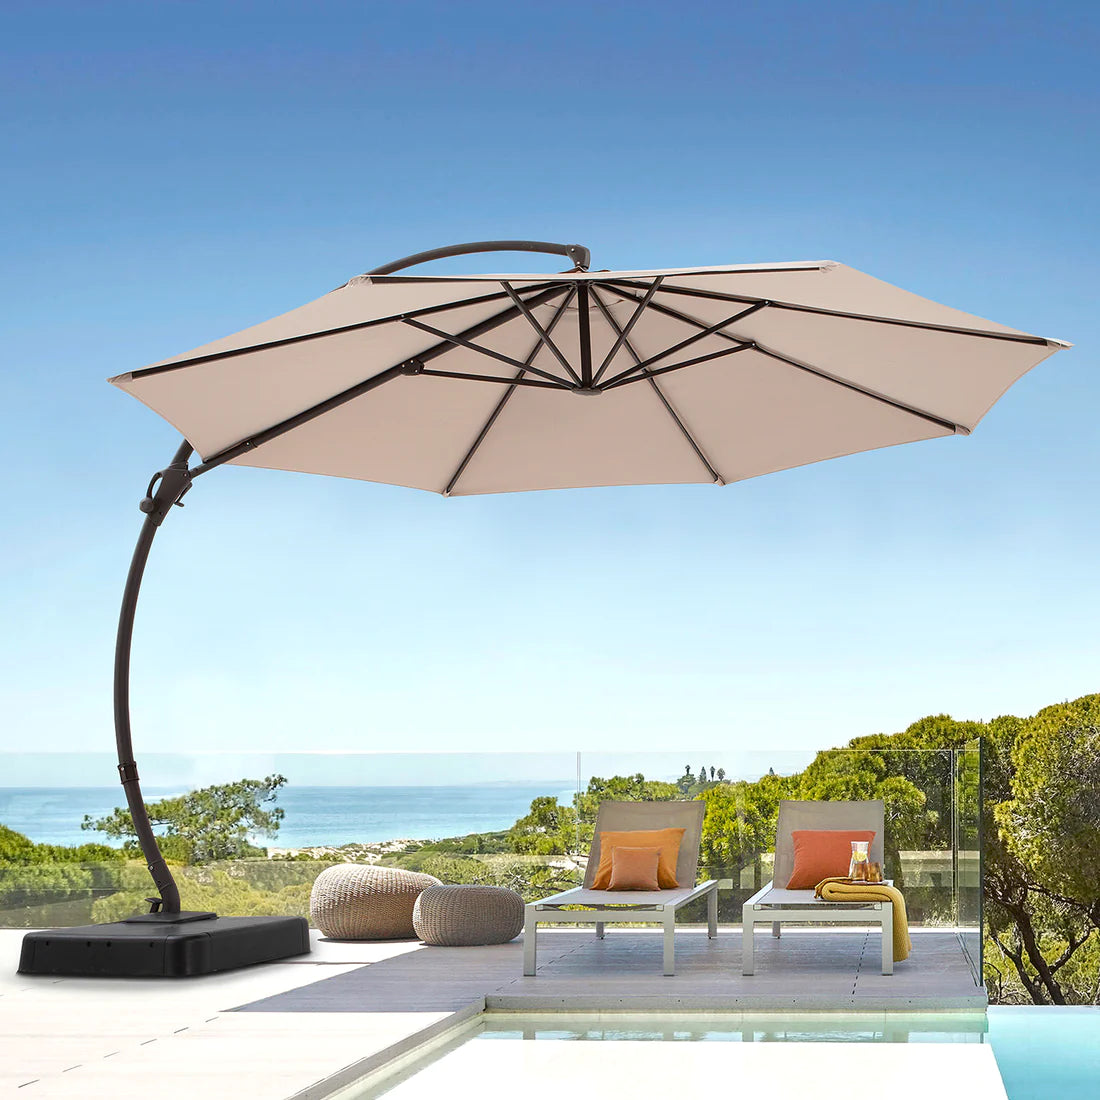 LAUSAINT HOME Accessories for Cantilever Umbrella